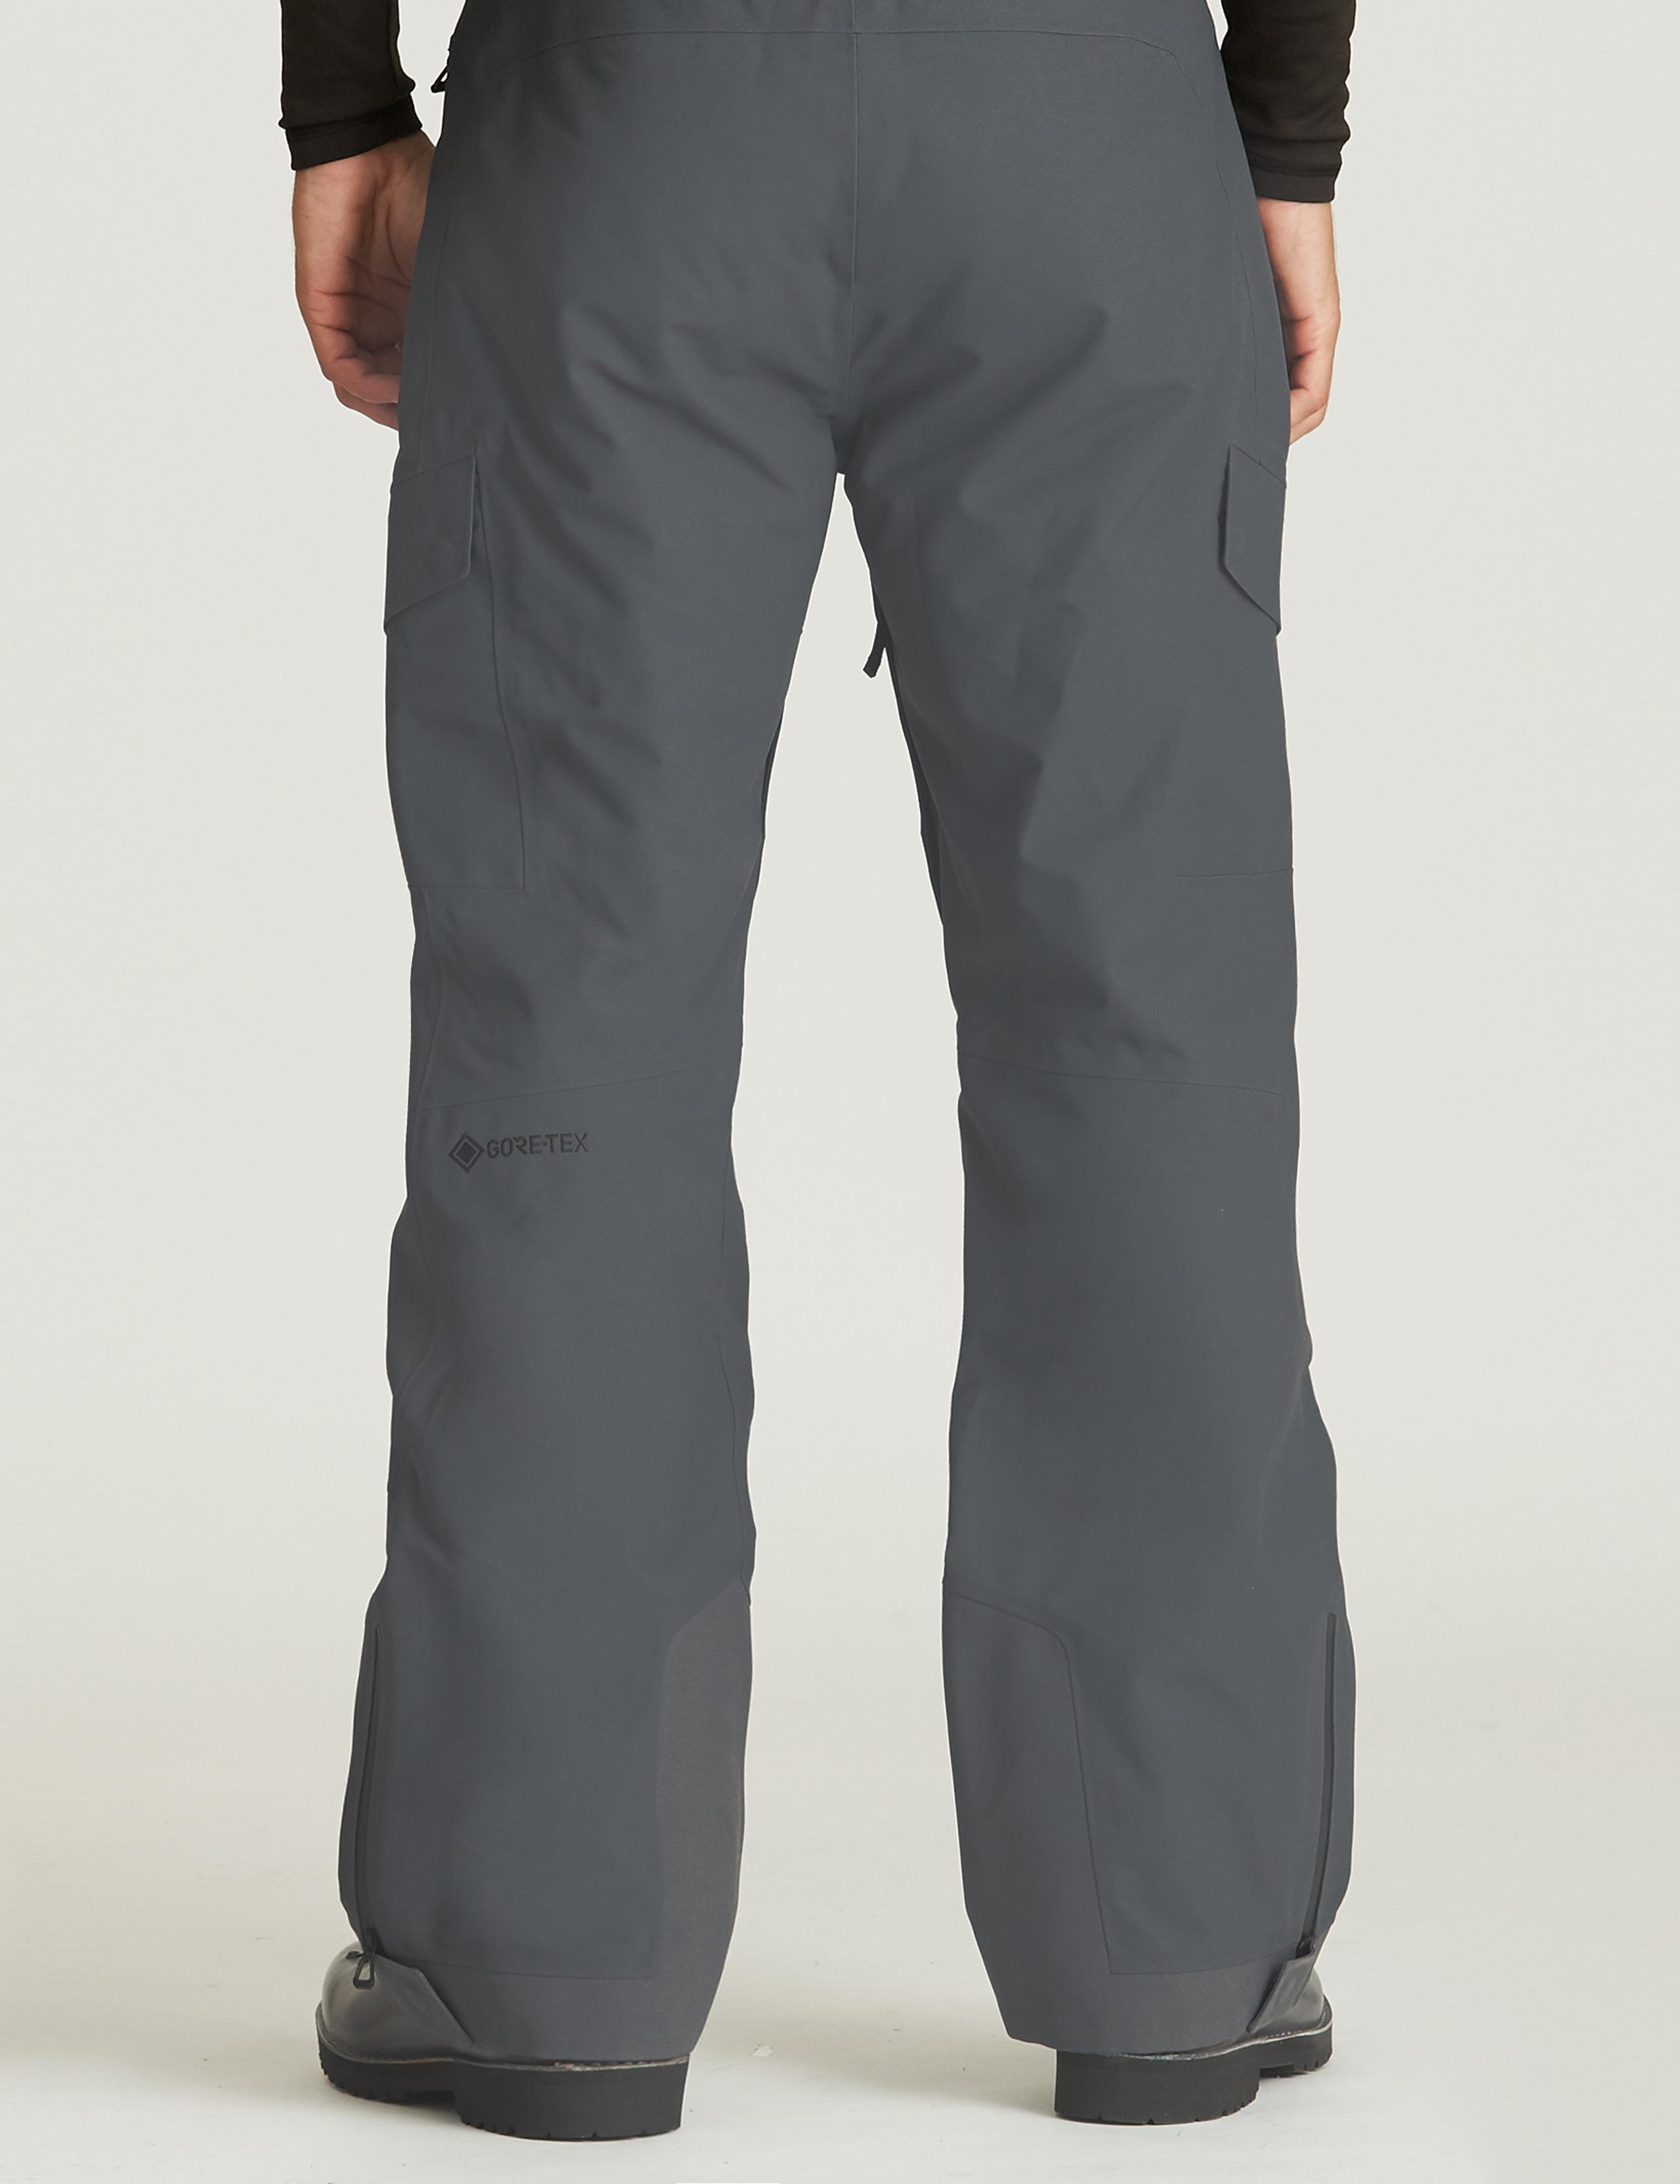 Back view of Carlyle Snow Pant